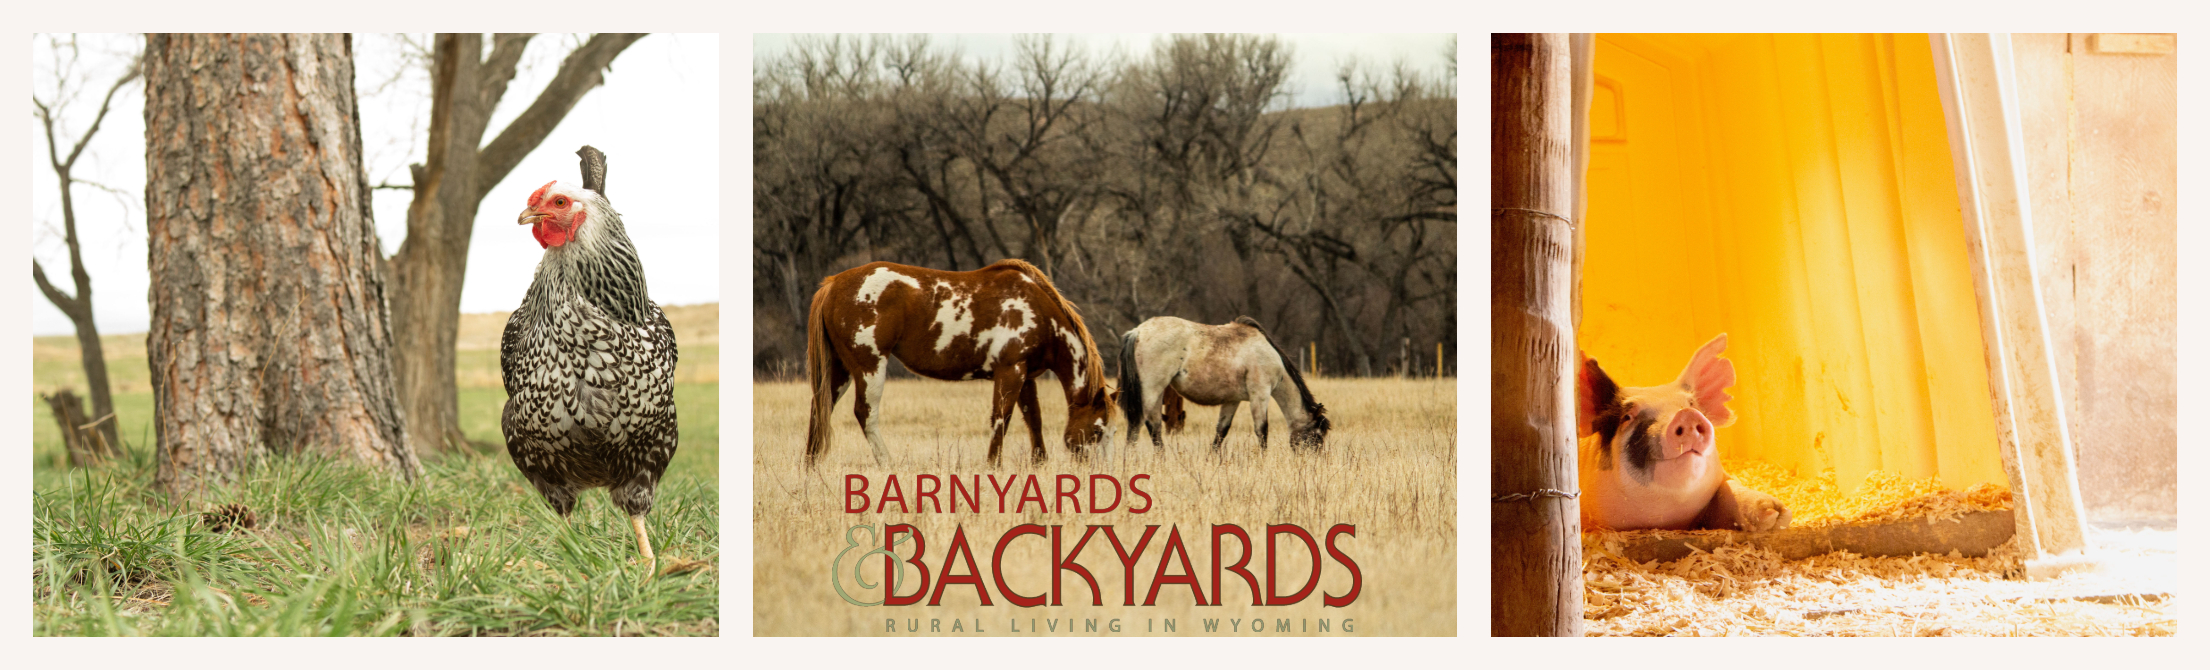 Barnyards & Backyards Masthead, Chicken, two horses, and a pig